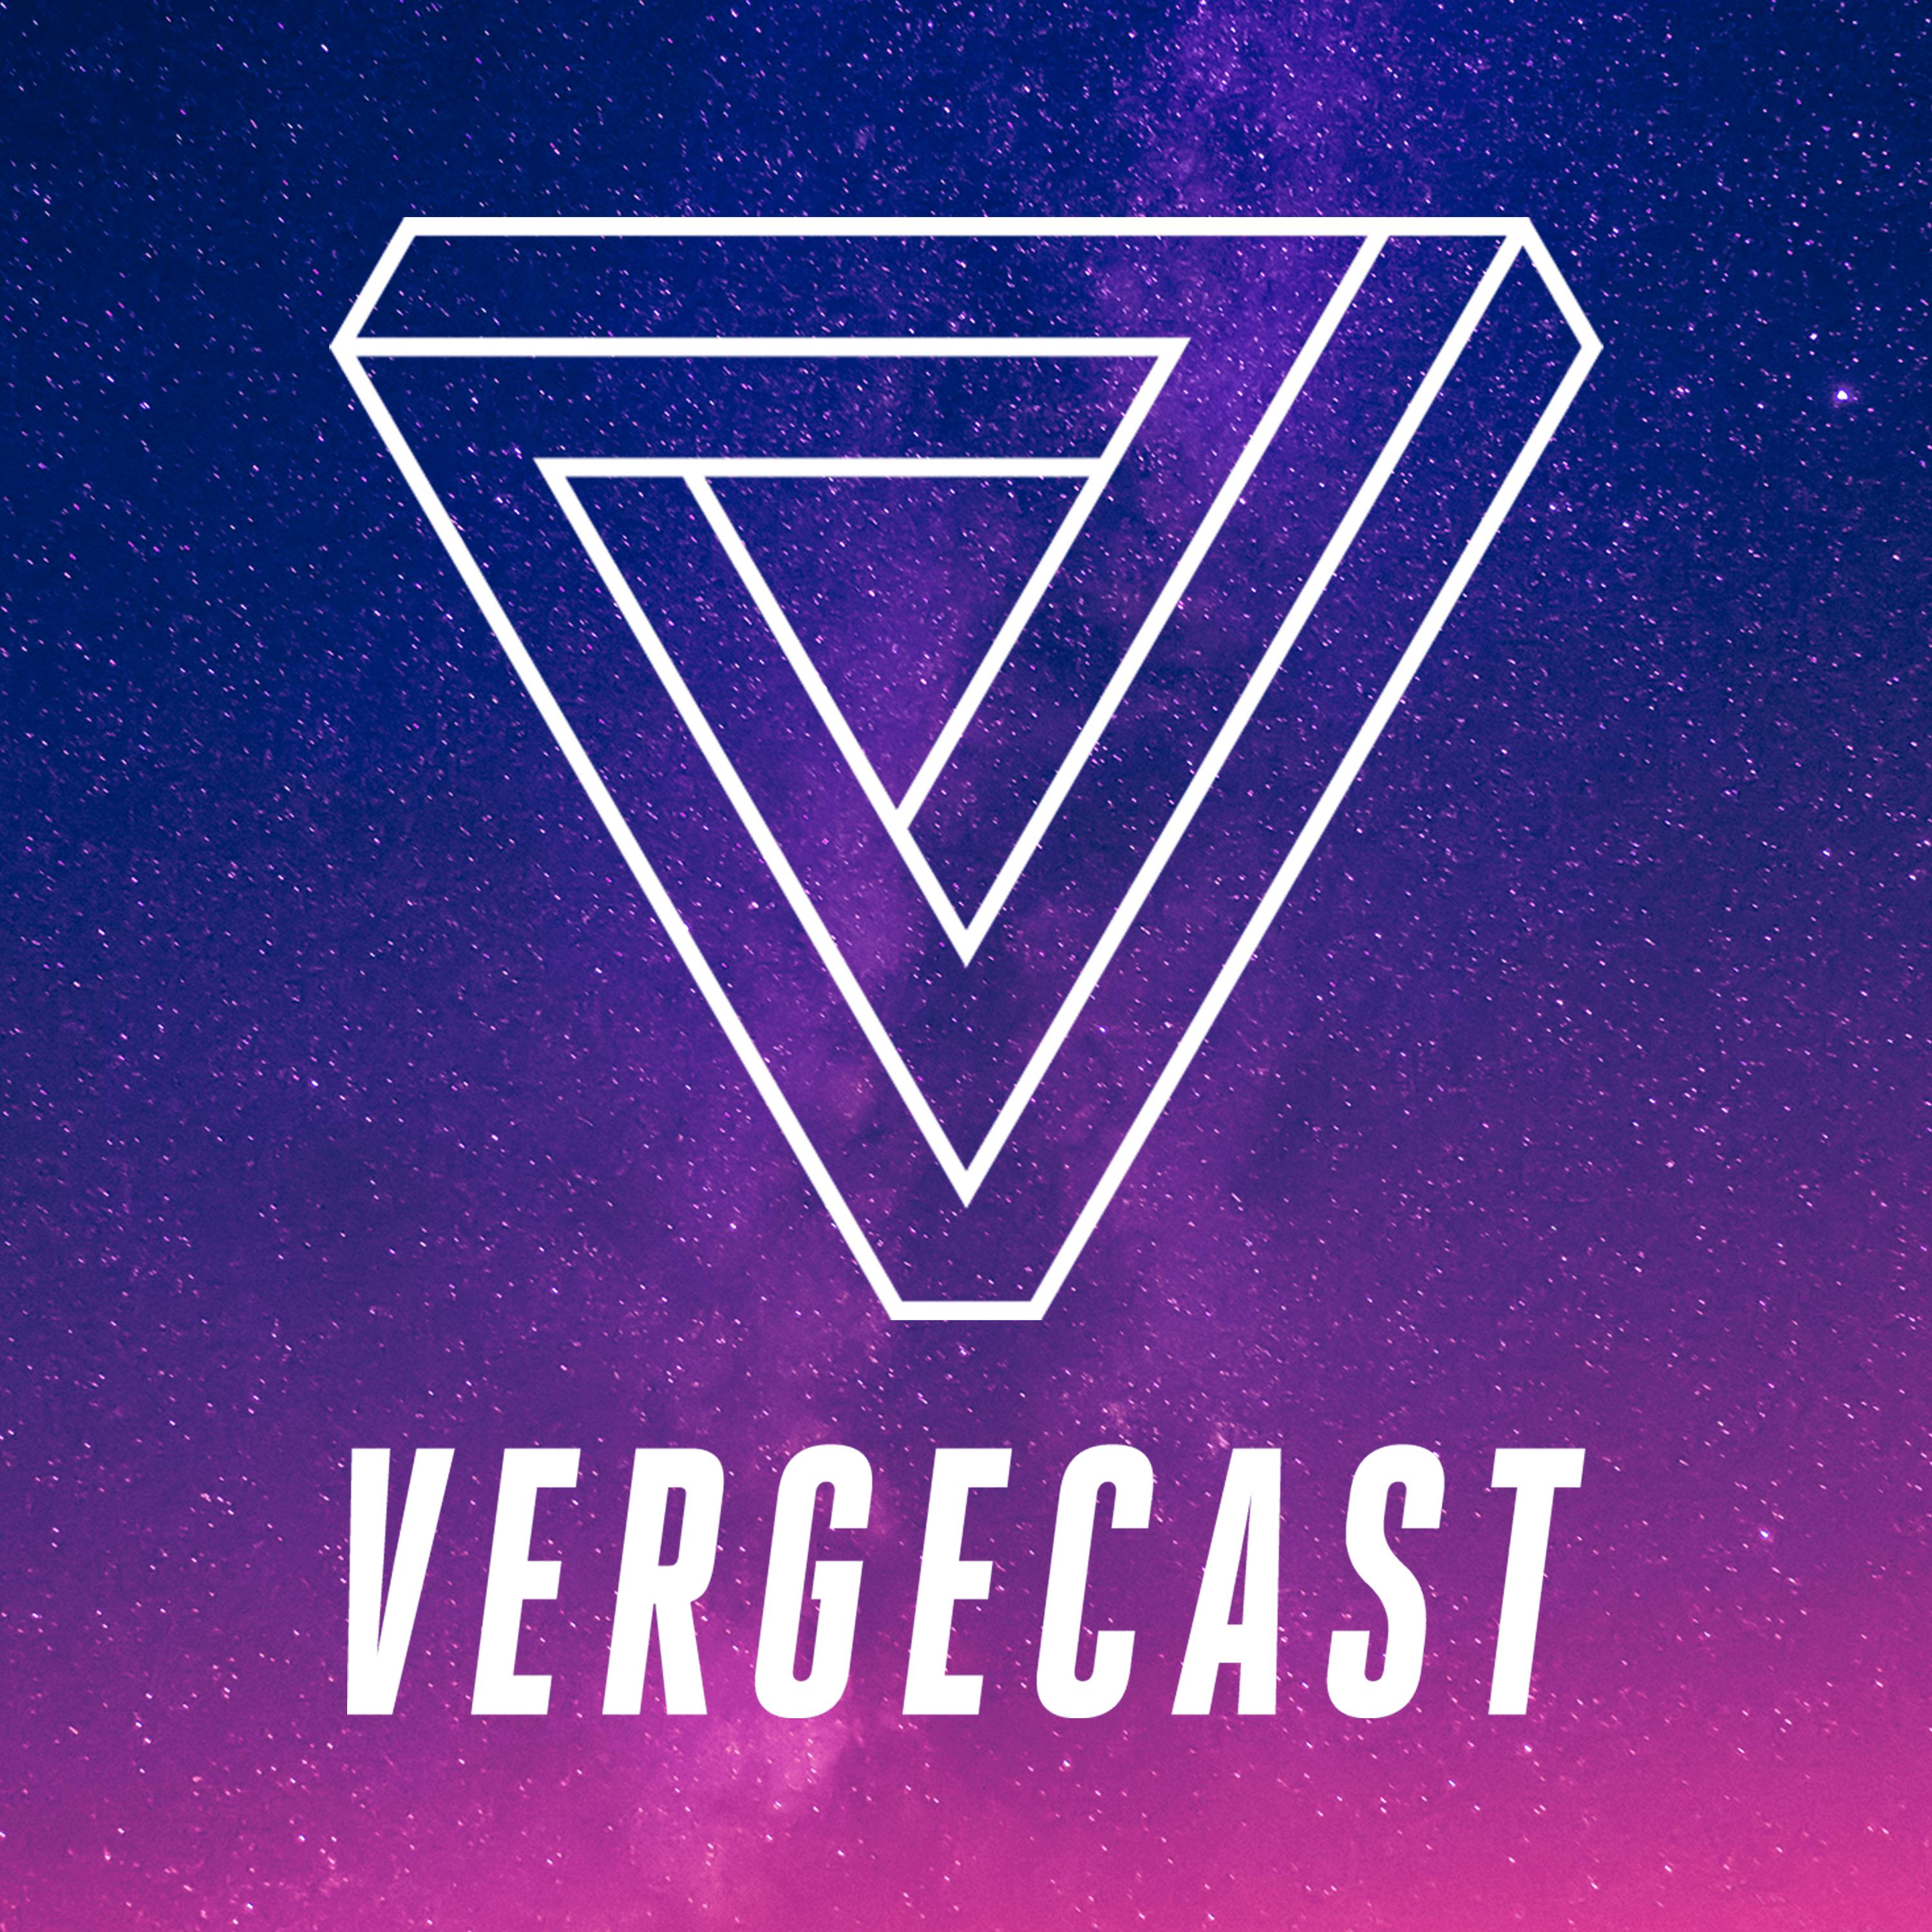 The Vergecast Podcast Addict - roblox blood and iron wiki guest